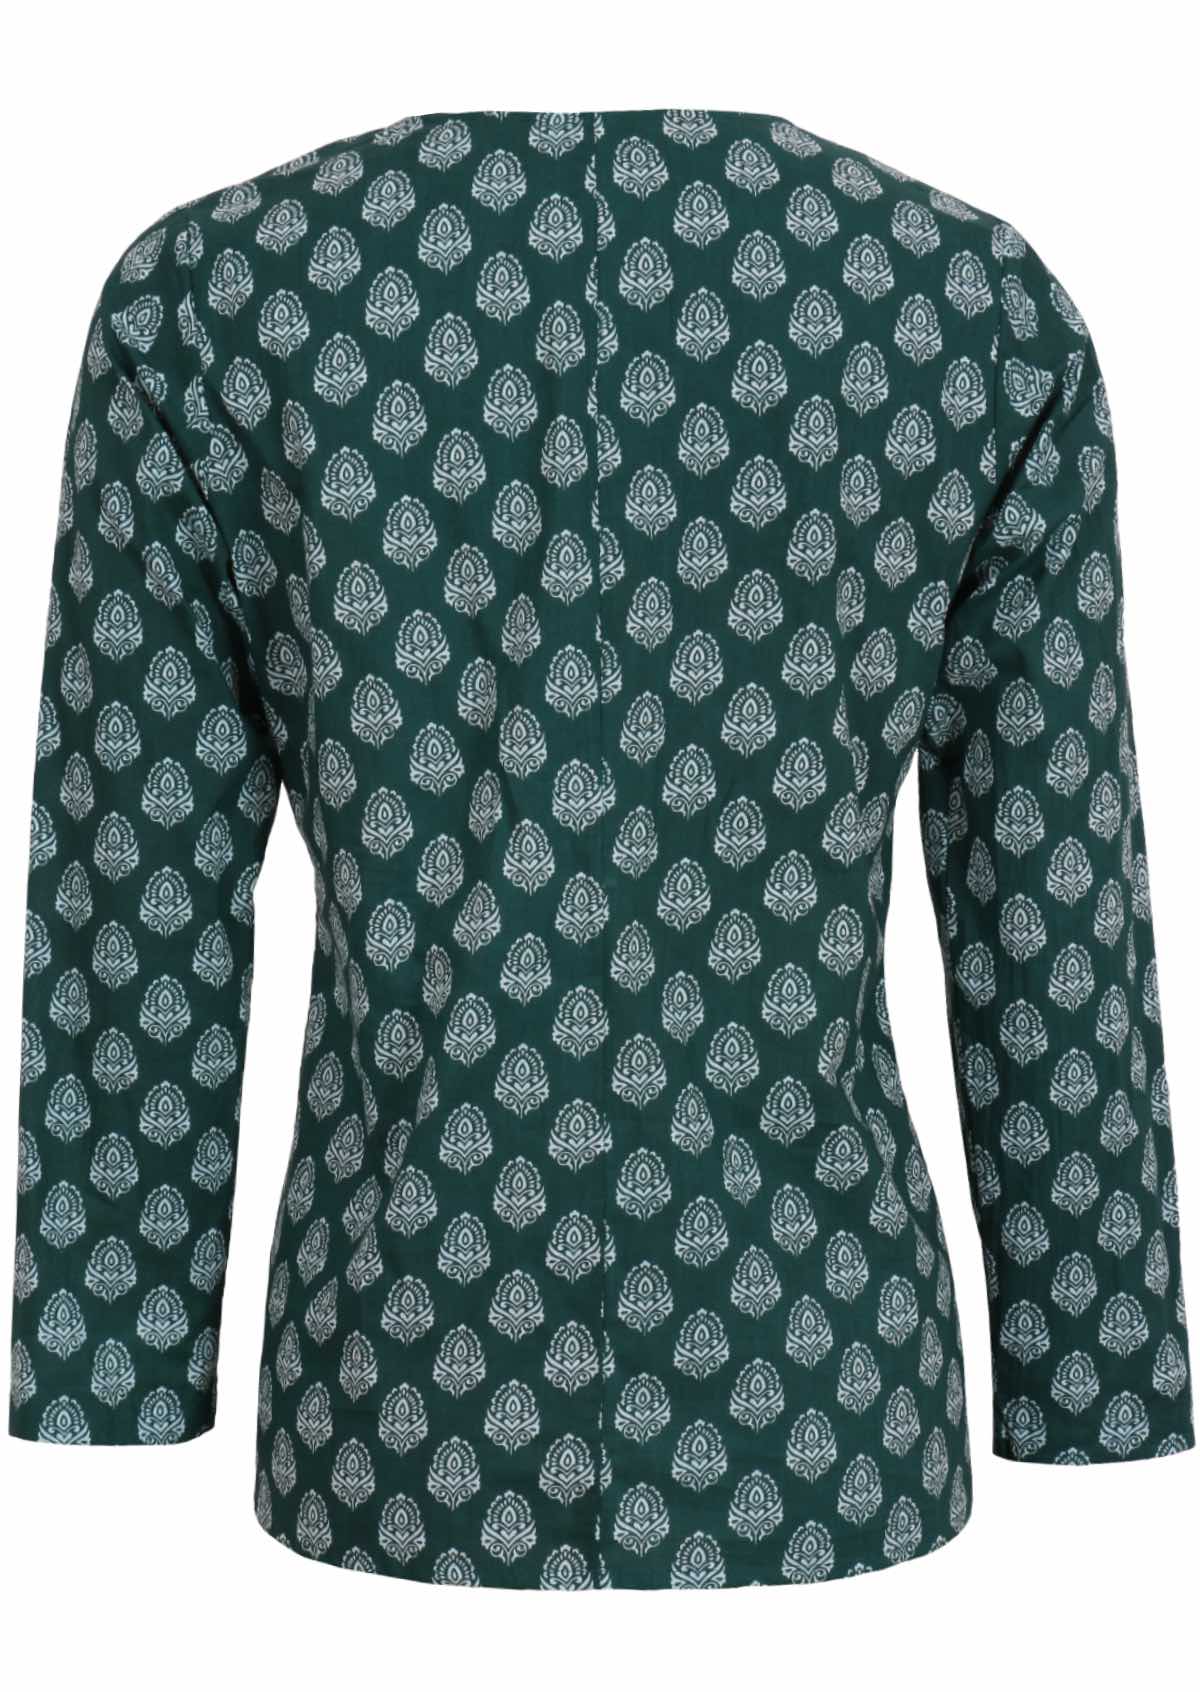 Long sleeve cotton top is great for the office or play